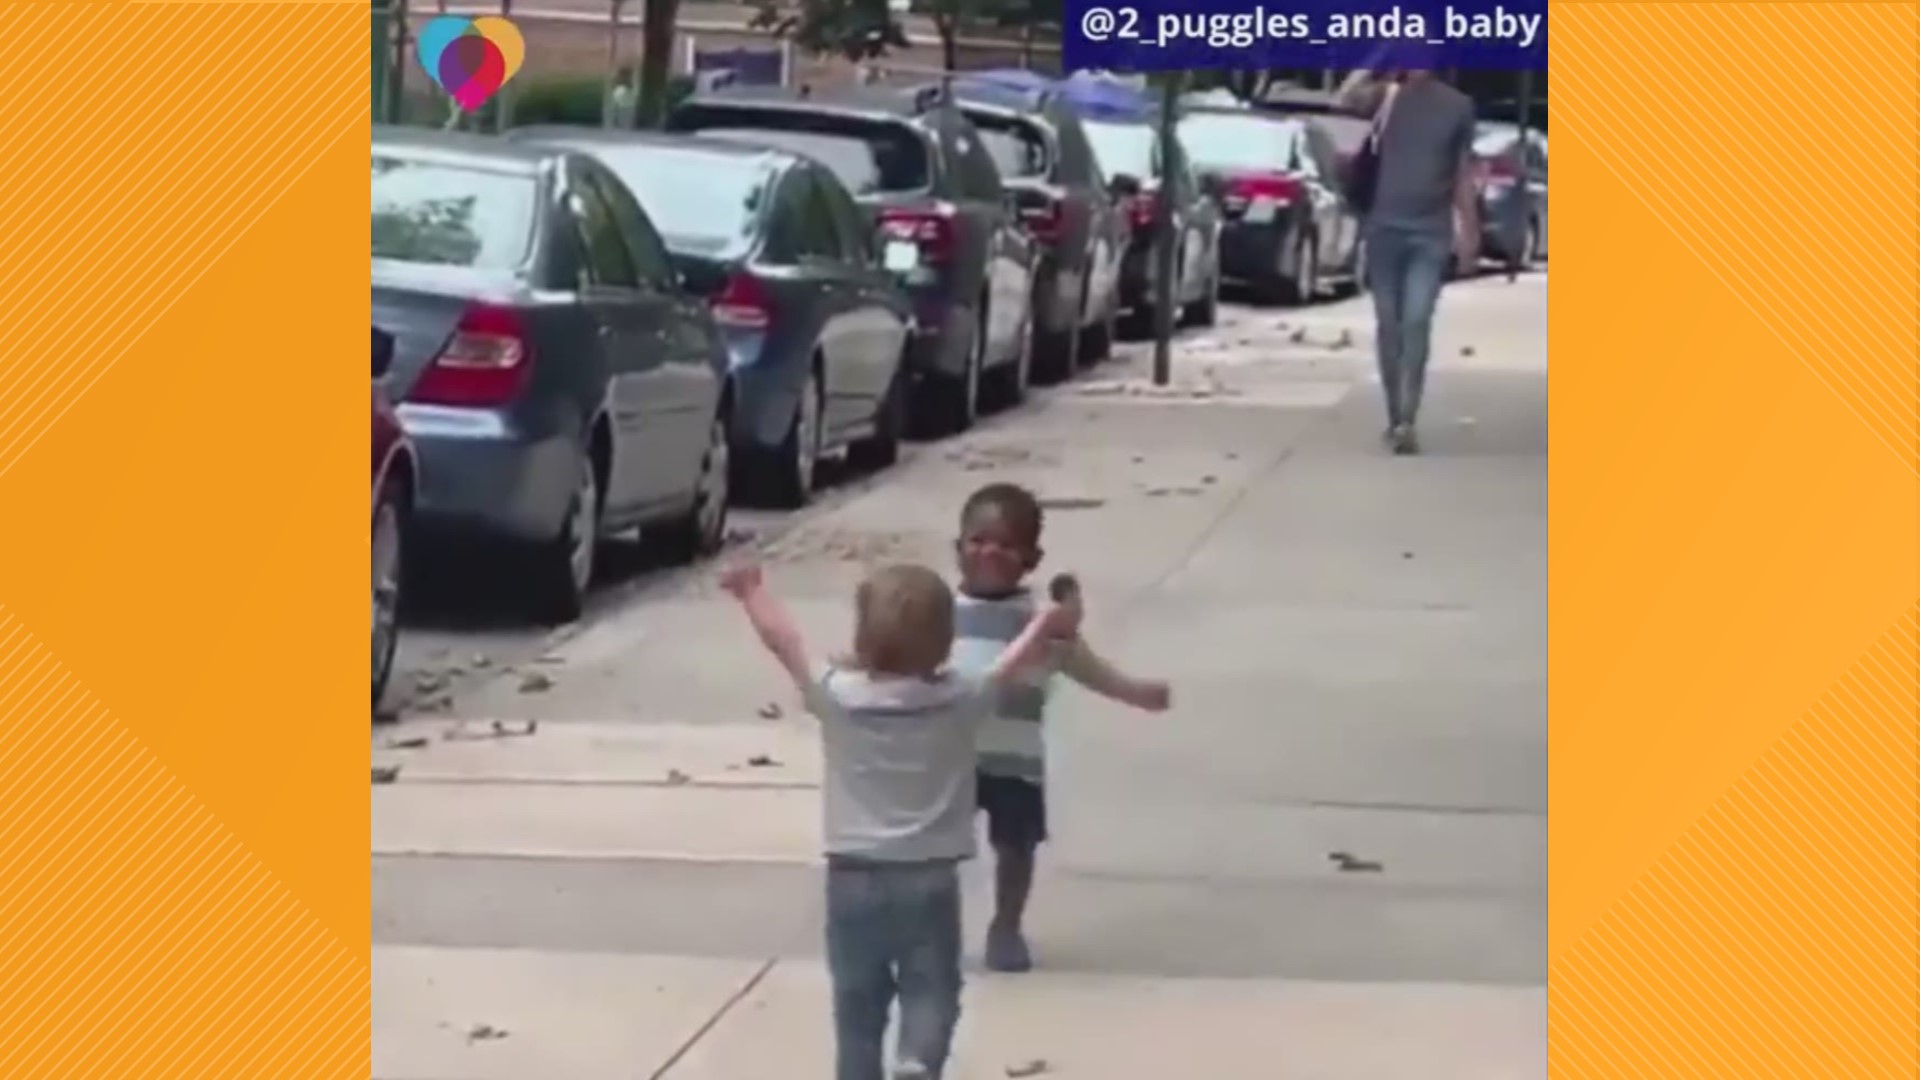 Two toddlers run to each other and hug on a New York City street and it's making the internet, social media melt. The 2-year-olds, Maxwell and Finnegan, met a year ago and are inseparable, the father of one boy said.